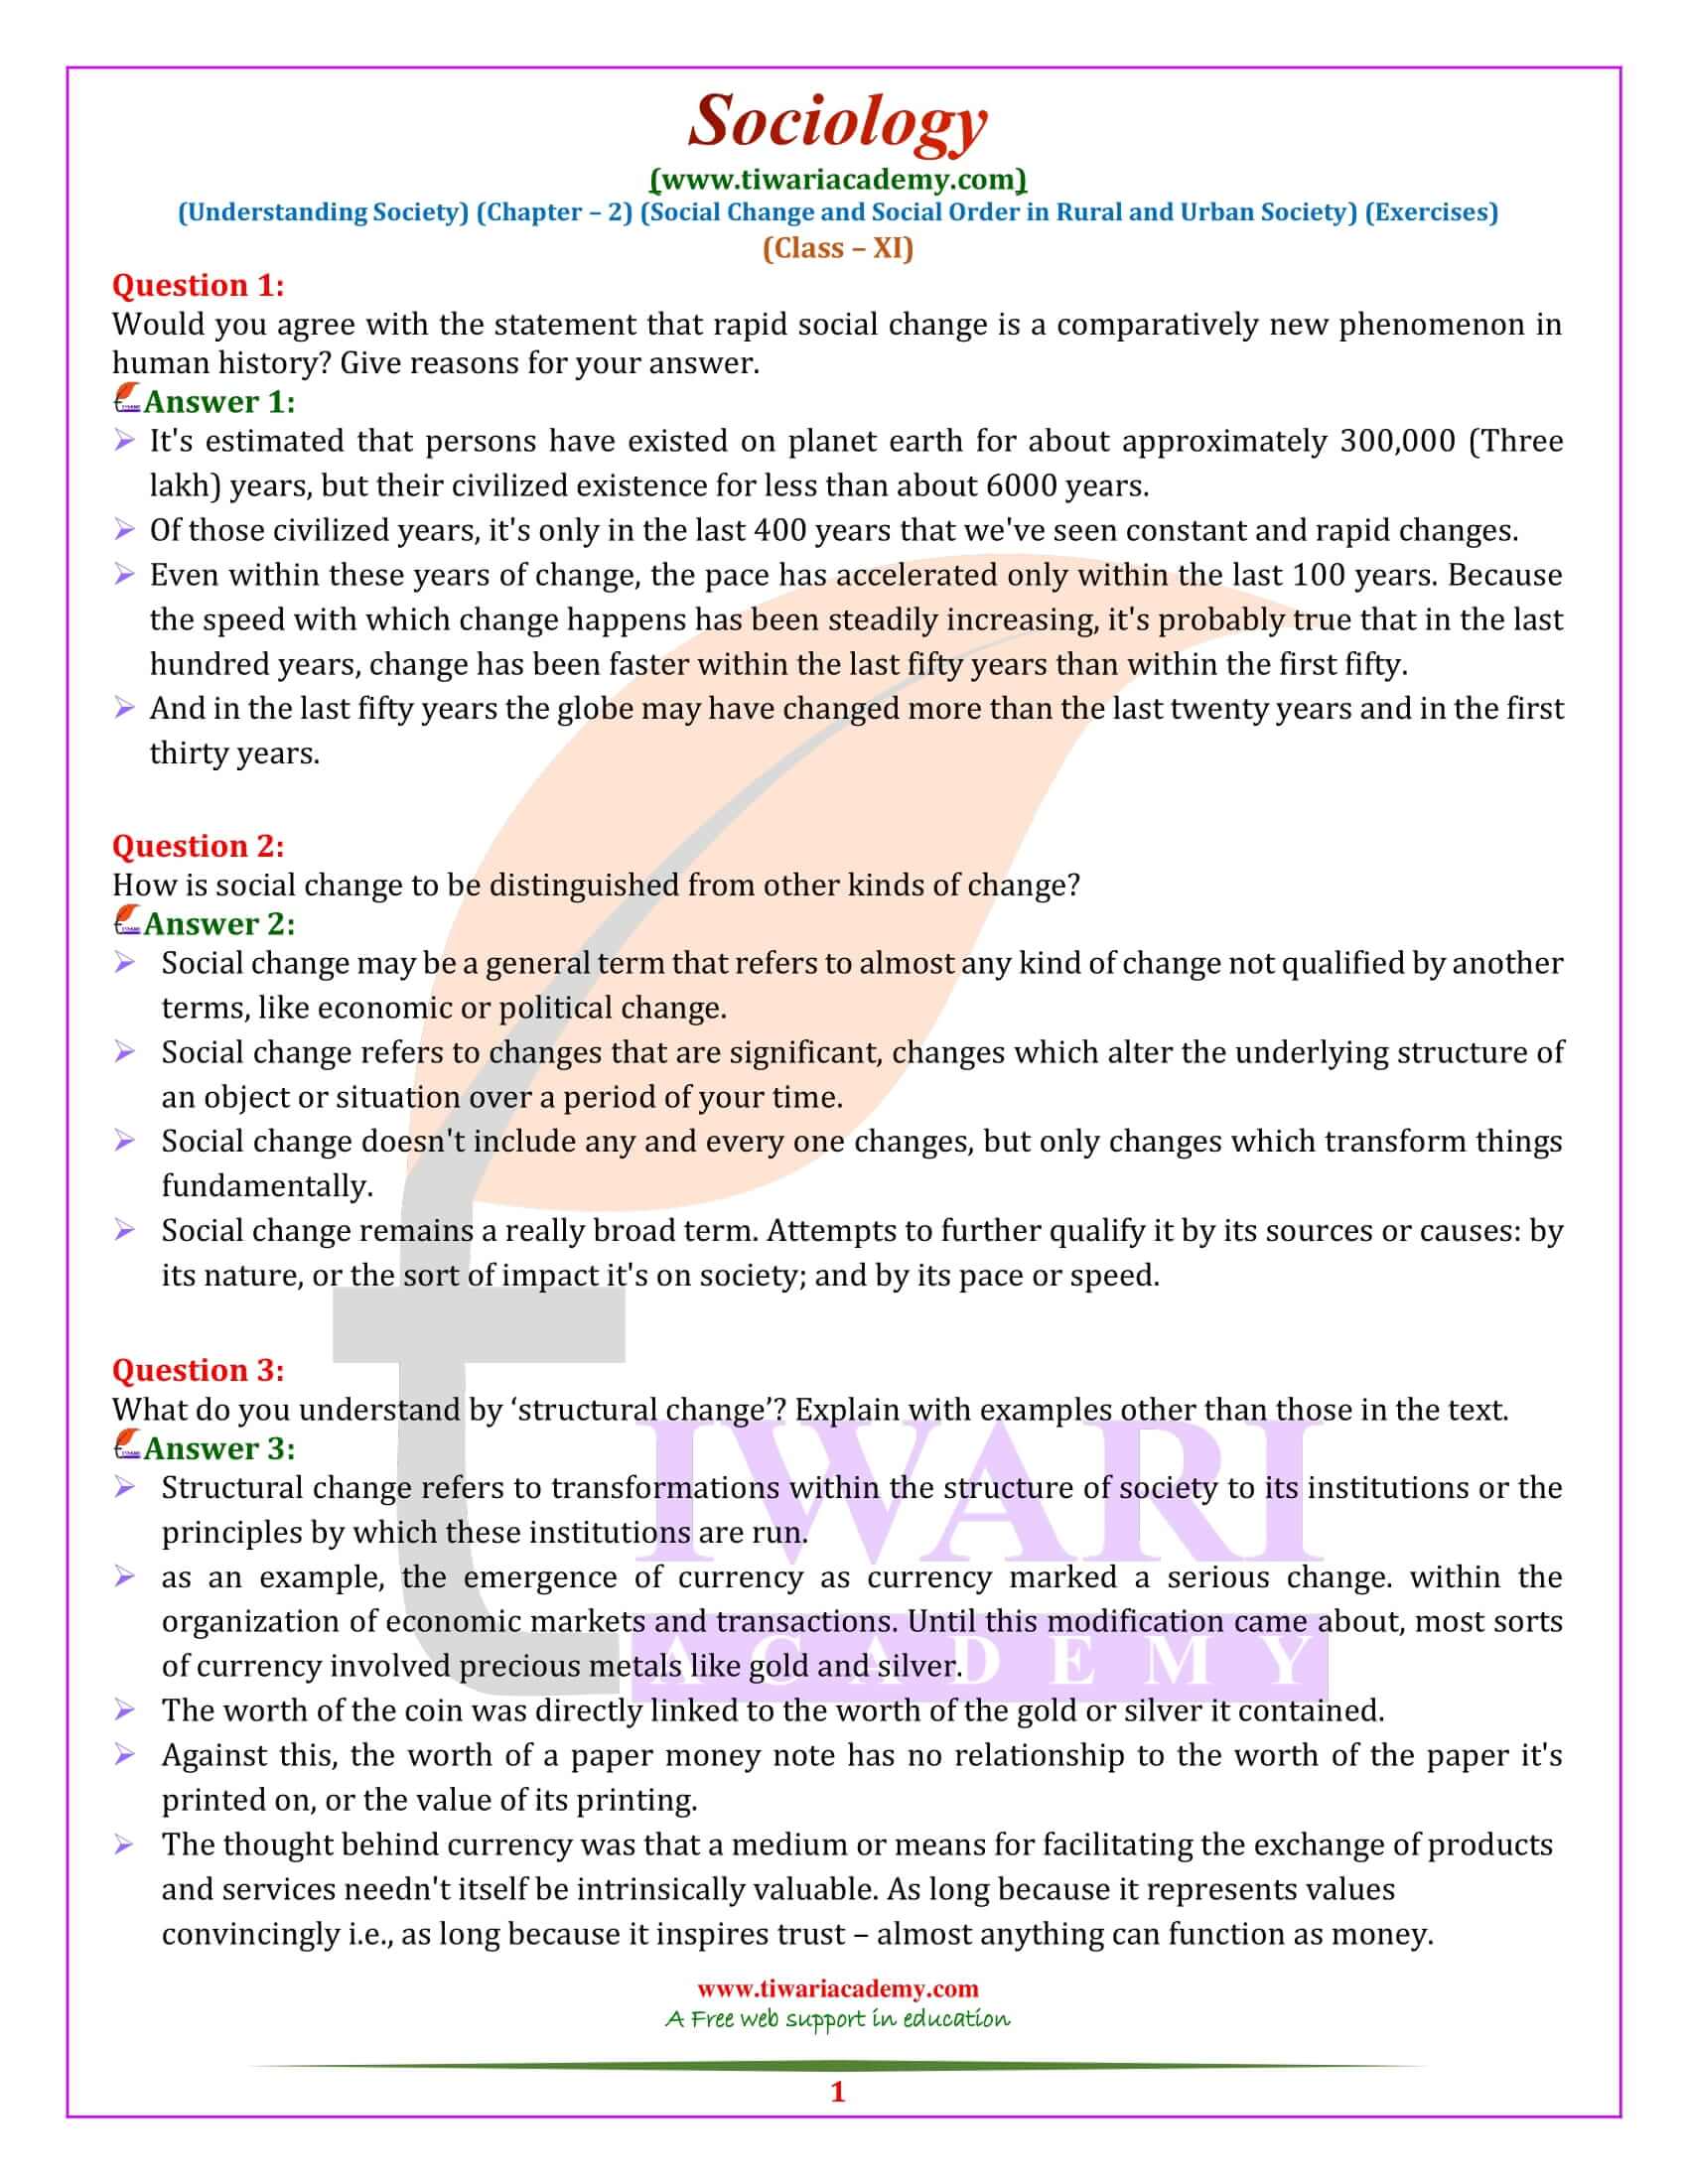 NCERT Solutions for Class 11 Sociology Chapter 2 Social Change and Social Order